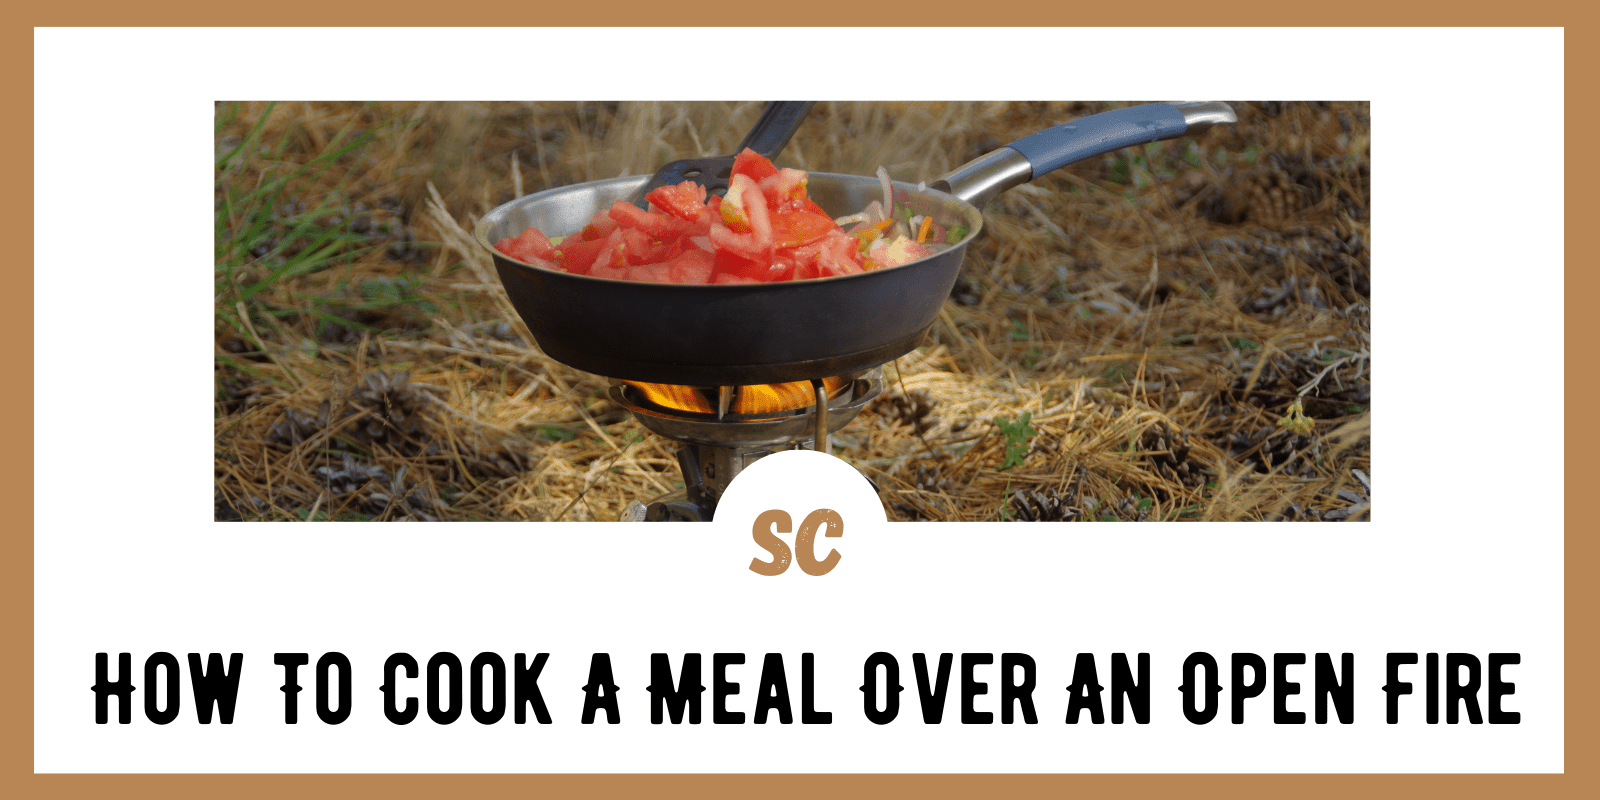 How To Cook A Meal Over An Open Fire